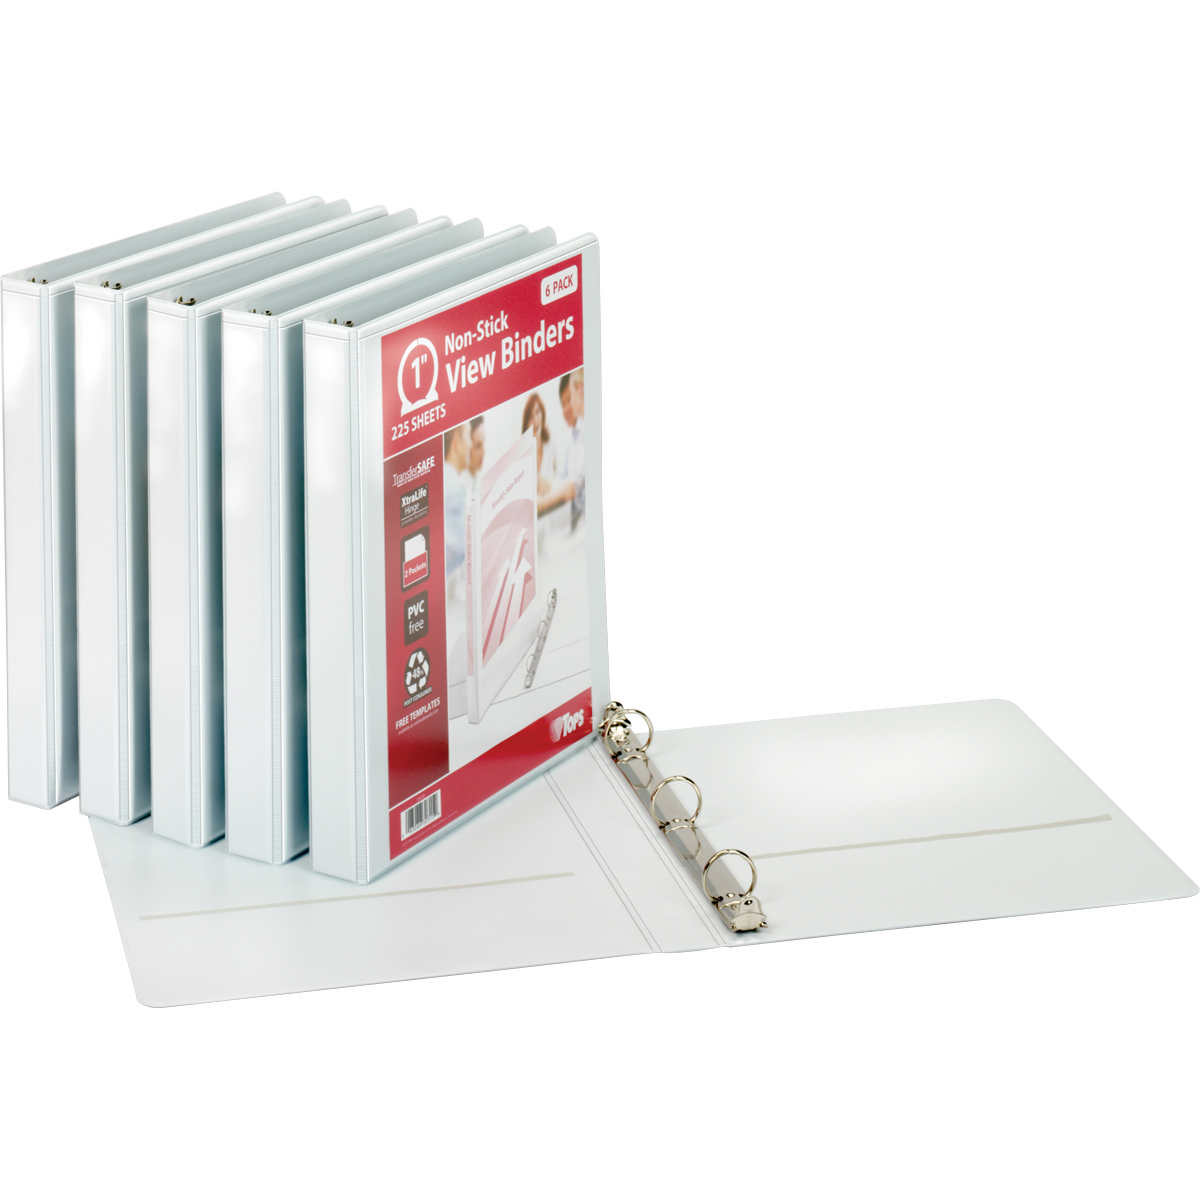 Buy Recycled Ring Binder online, wholesale suppliers in Melbourne